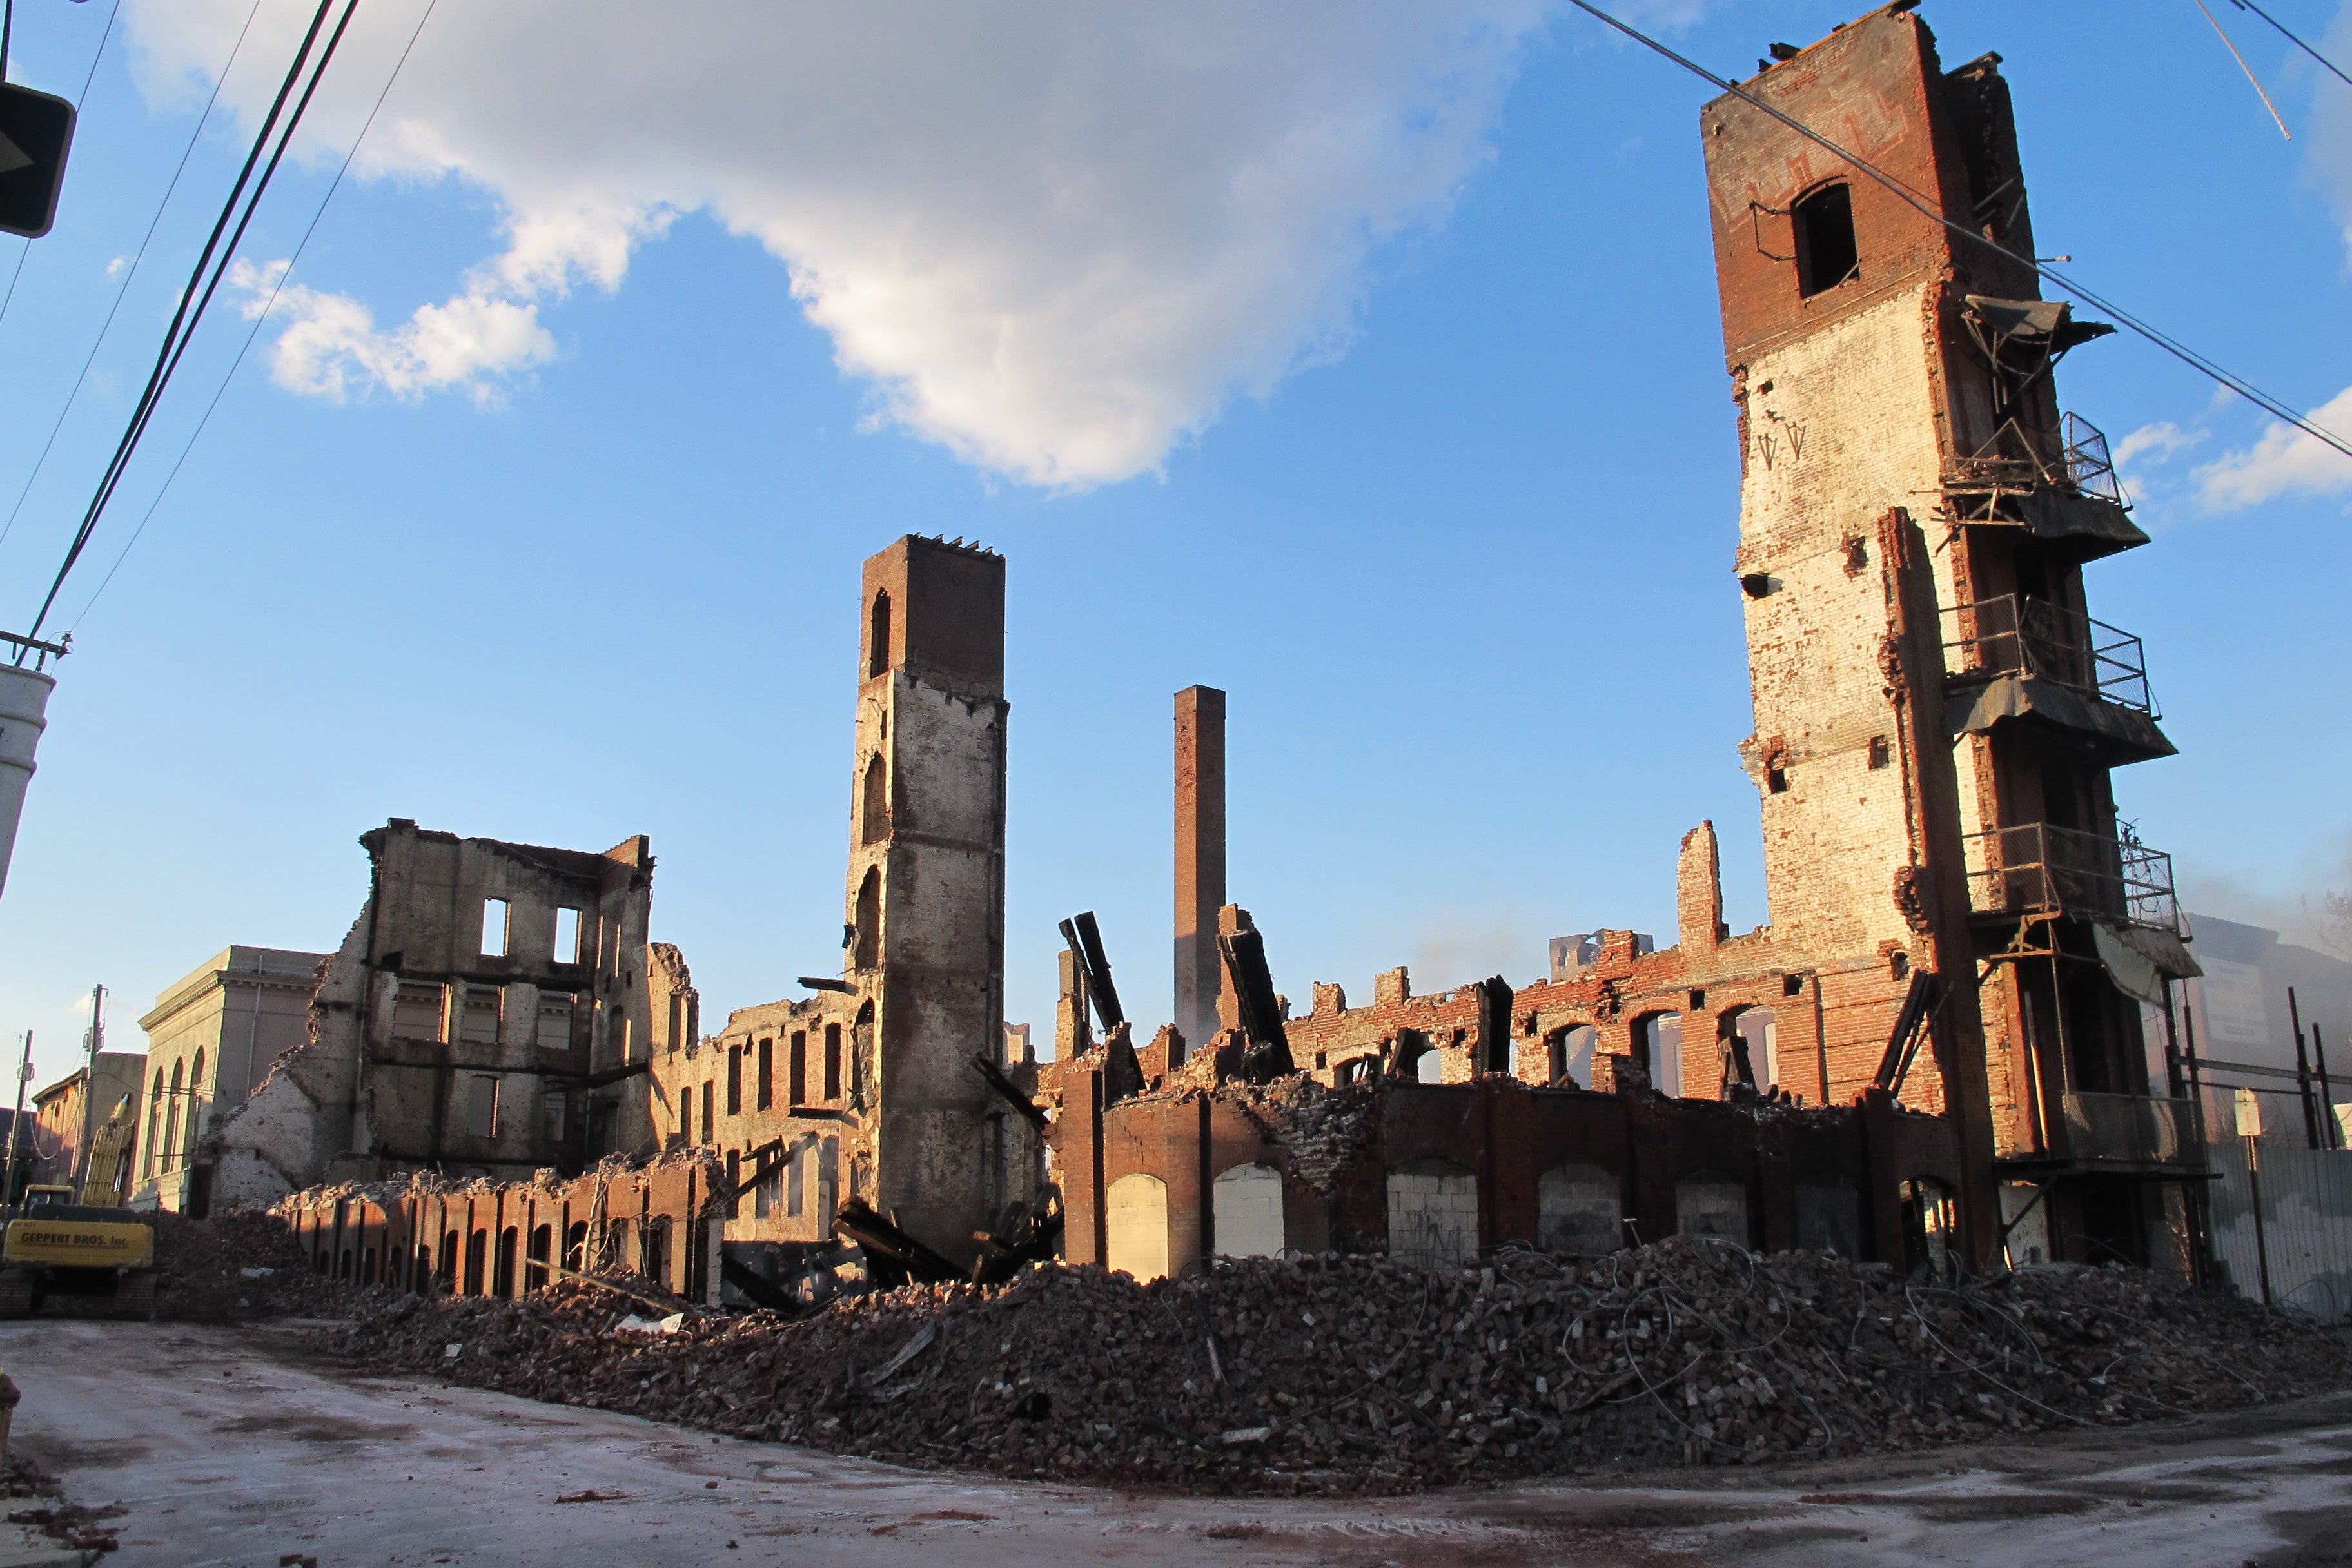 The former Buck Hosiery factory's rubble and charred remains.